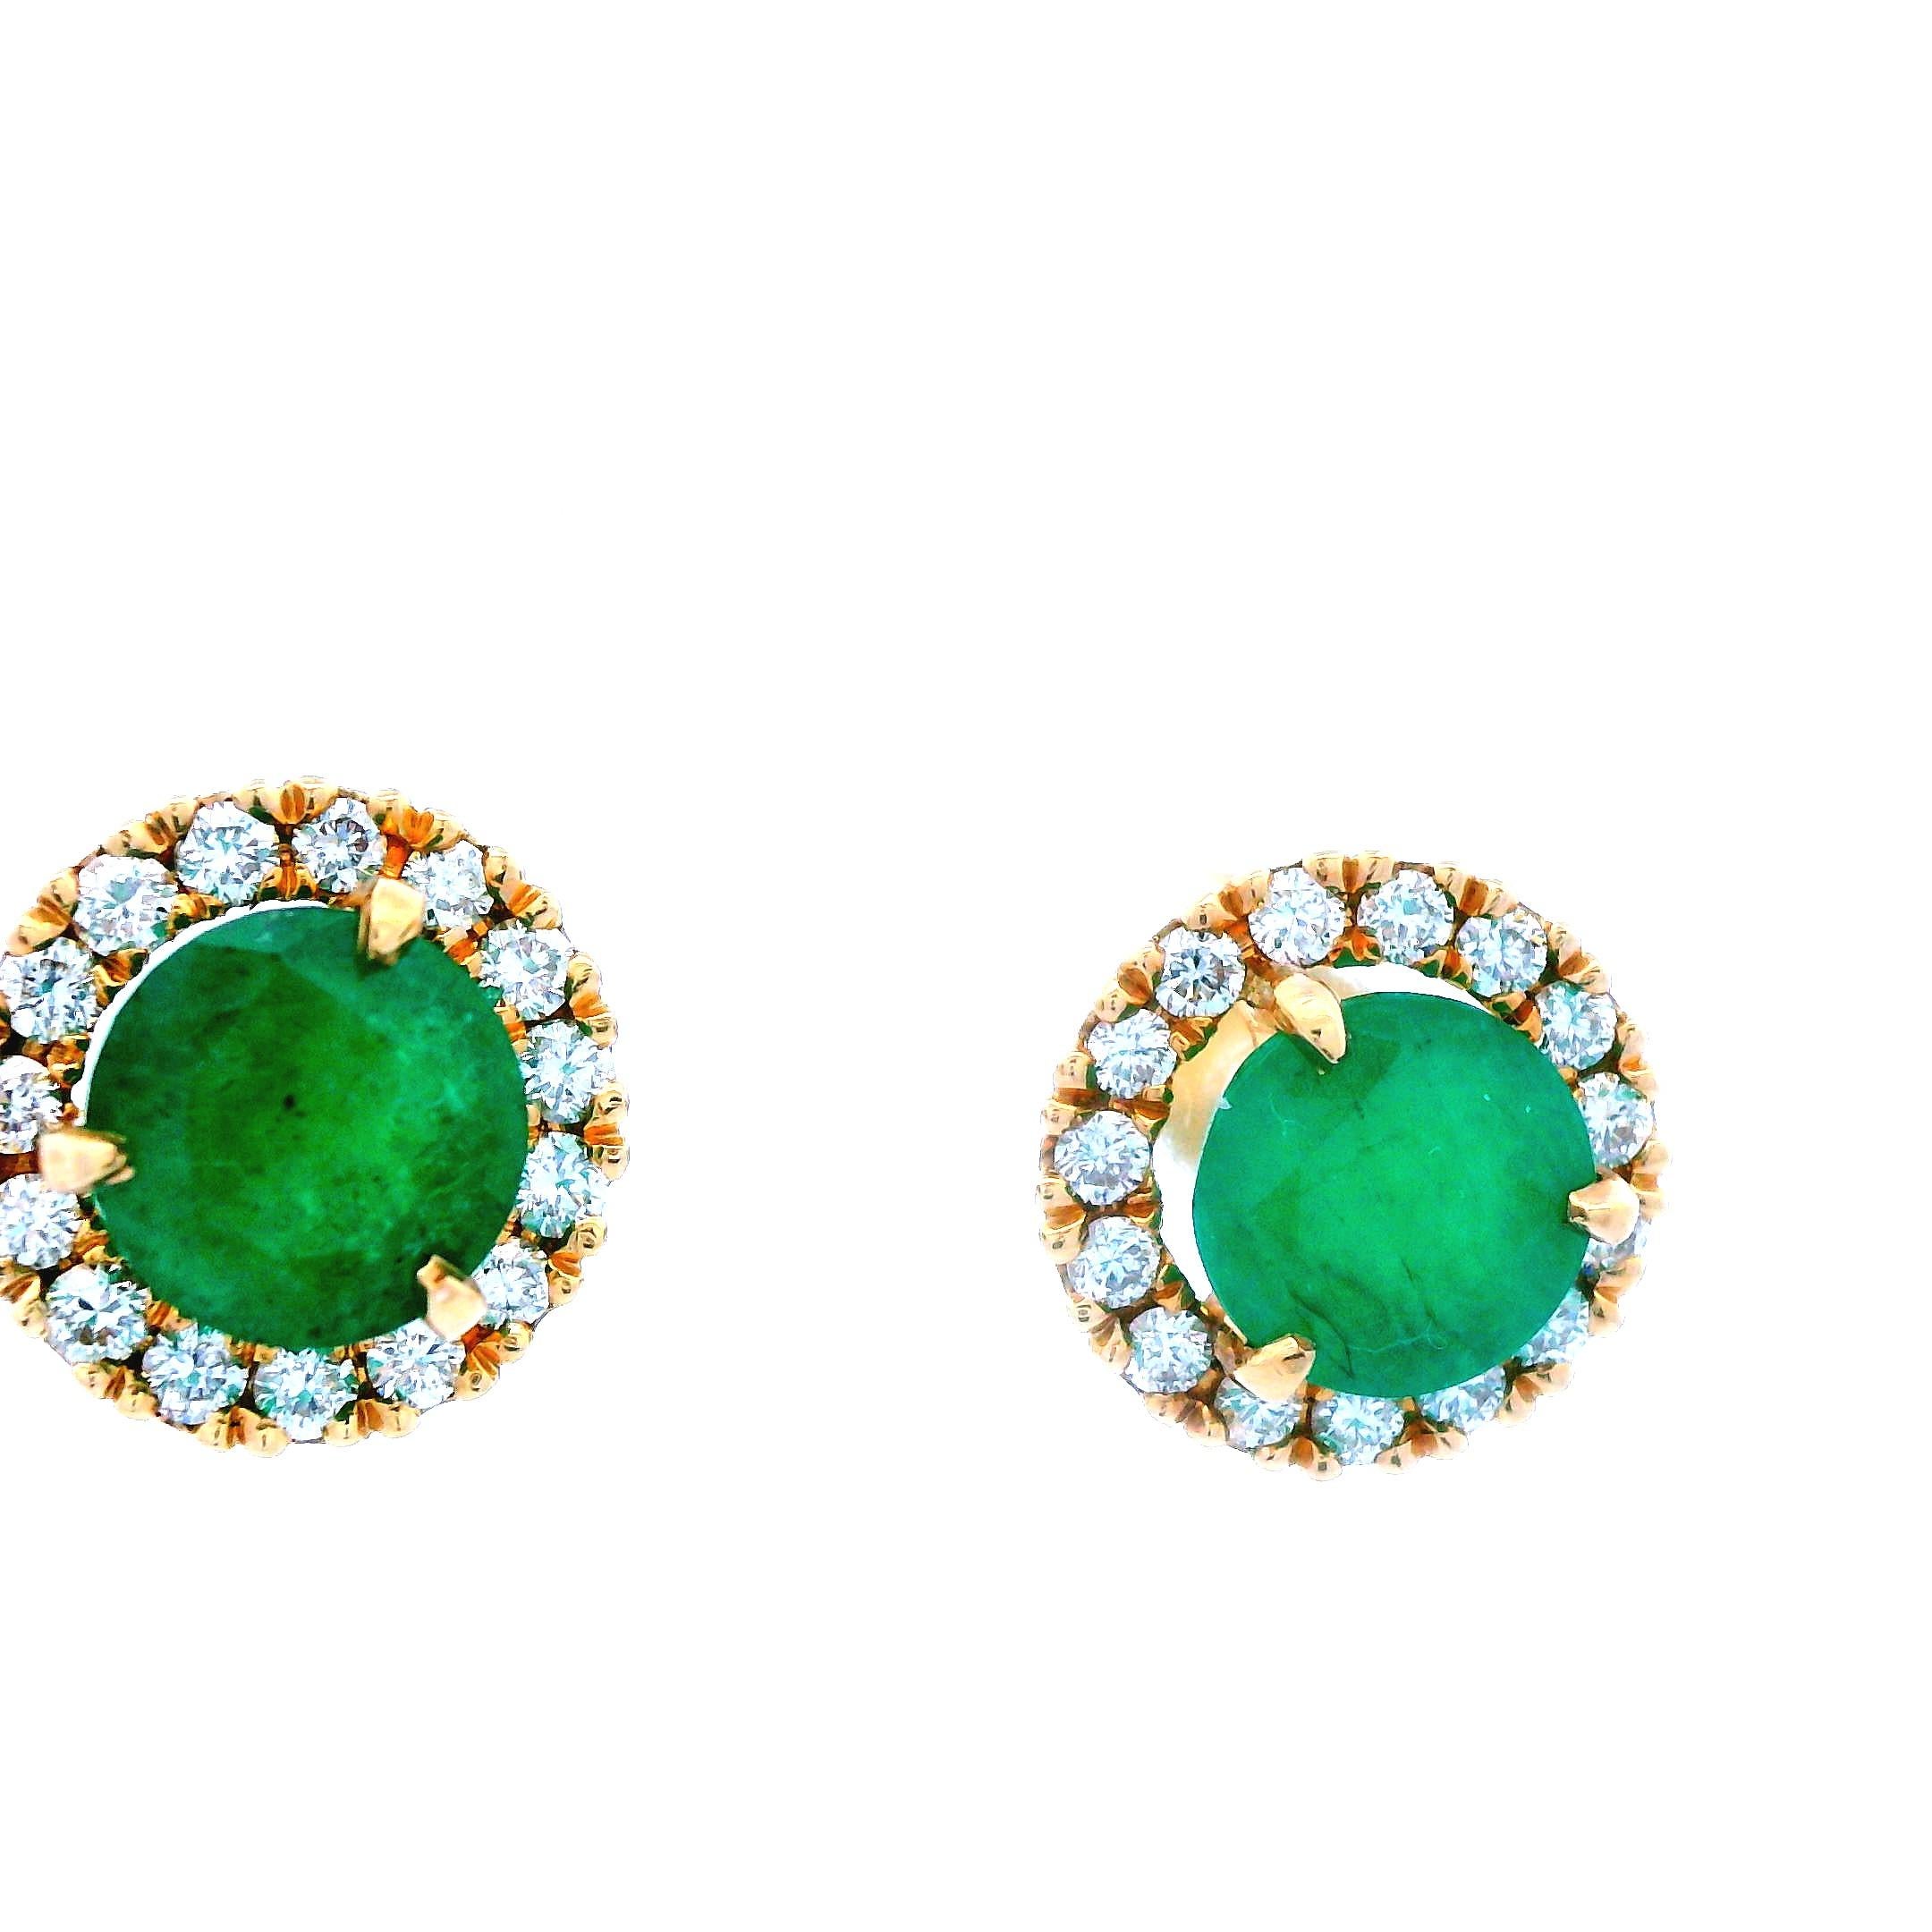 Contemporary 14k yellow Gold Emerald and Diamond Halo Earrings  In Excellent Condition For Sale In Lexington, KY